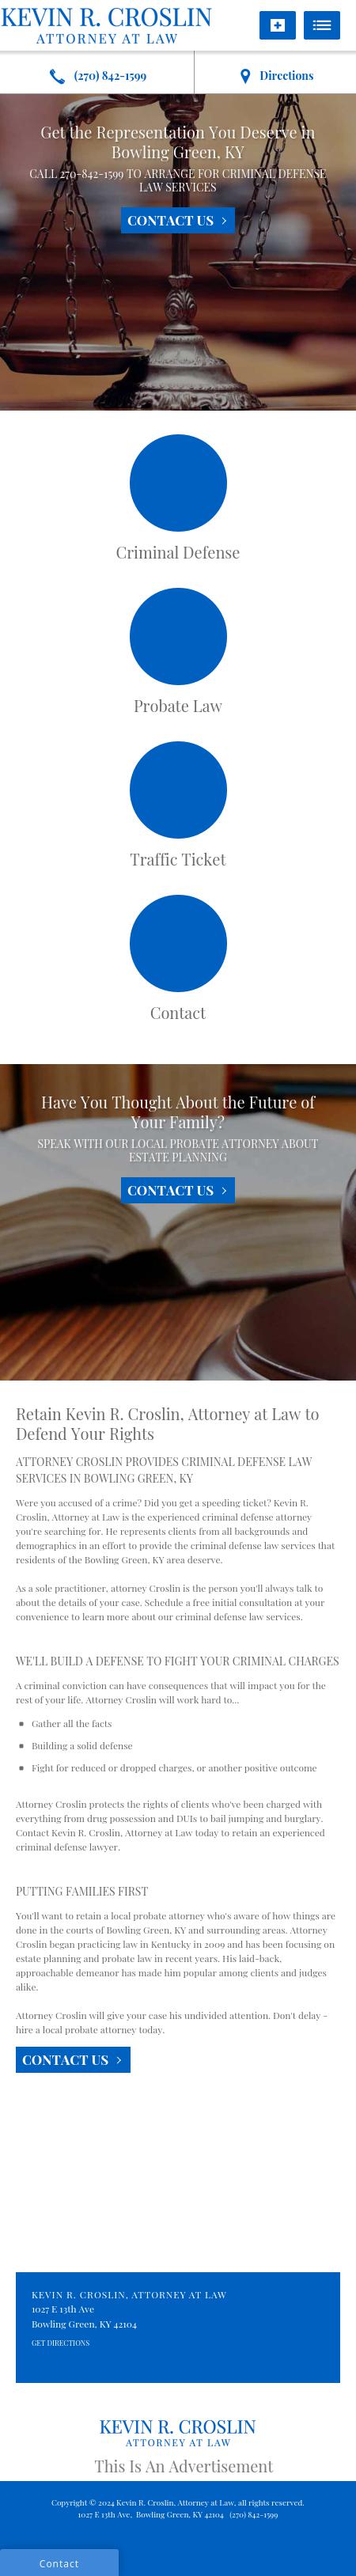 Kevin R. Croslin, Attorney at Law - Bowling Green KY Lawyers